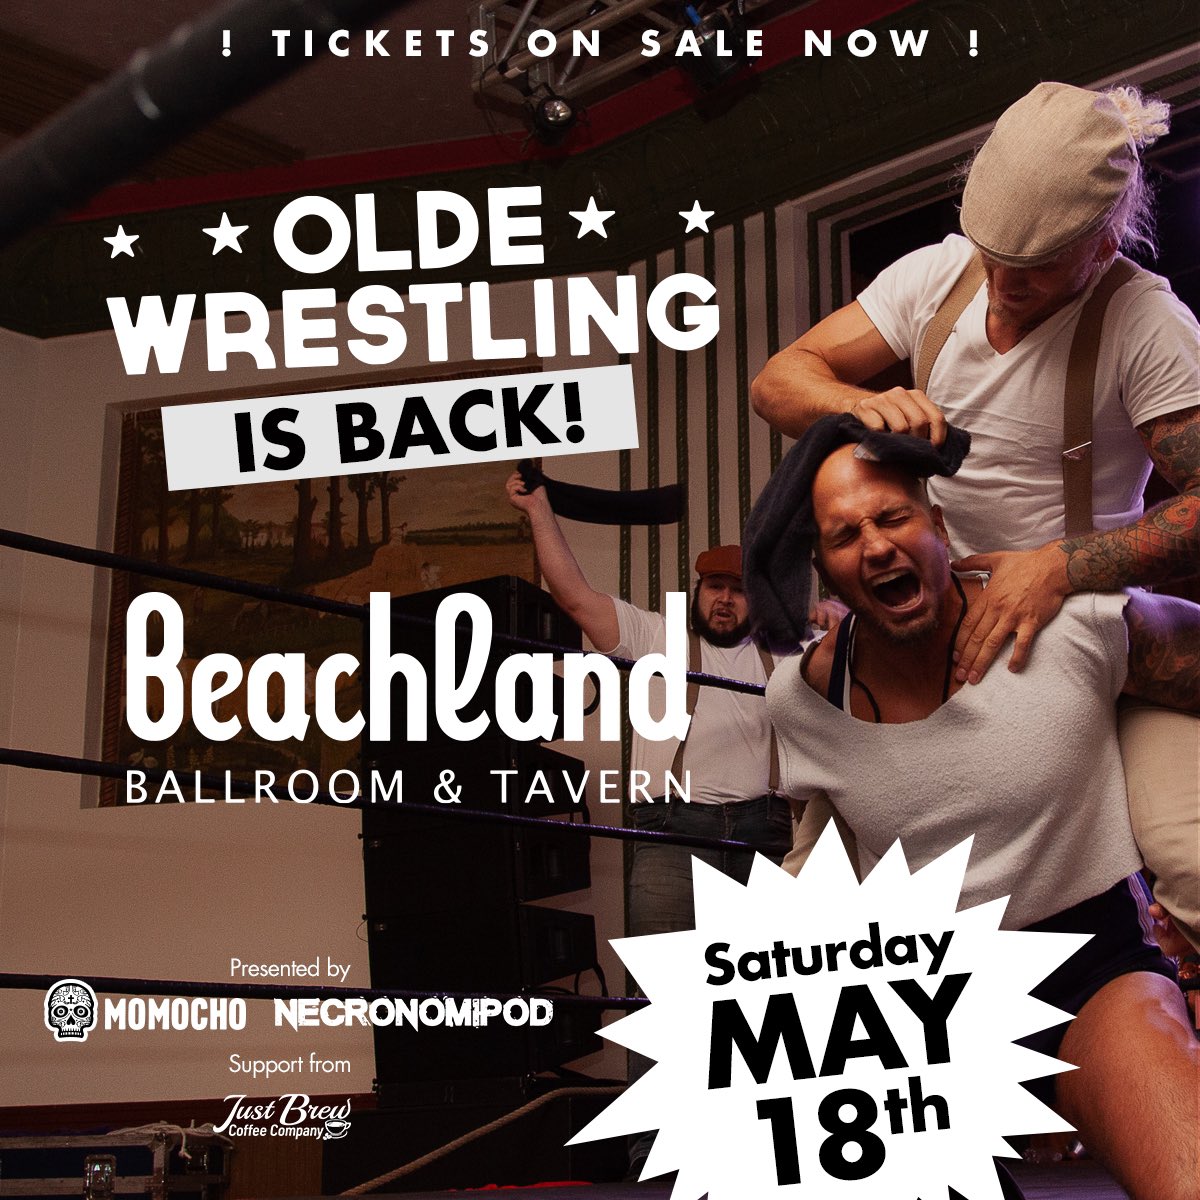 We’re back at @BeachlandCLE on Saturday, May 18th! Tickets on sale now and limited seating is available. 🎟️ beachlandballroom.com/e/13548763/old…